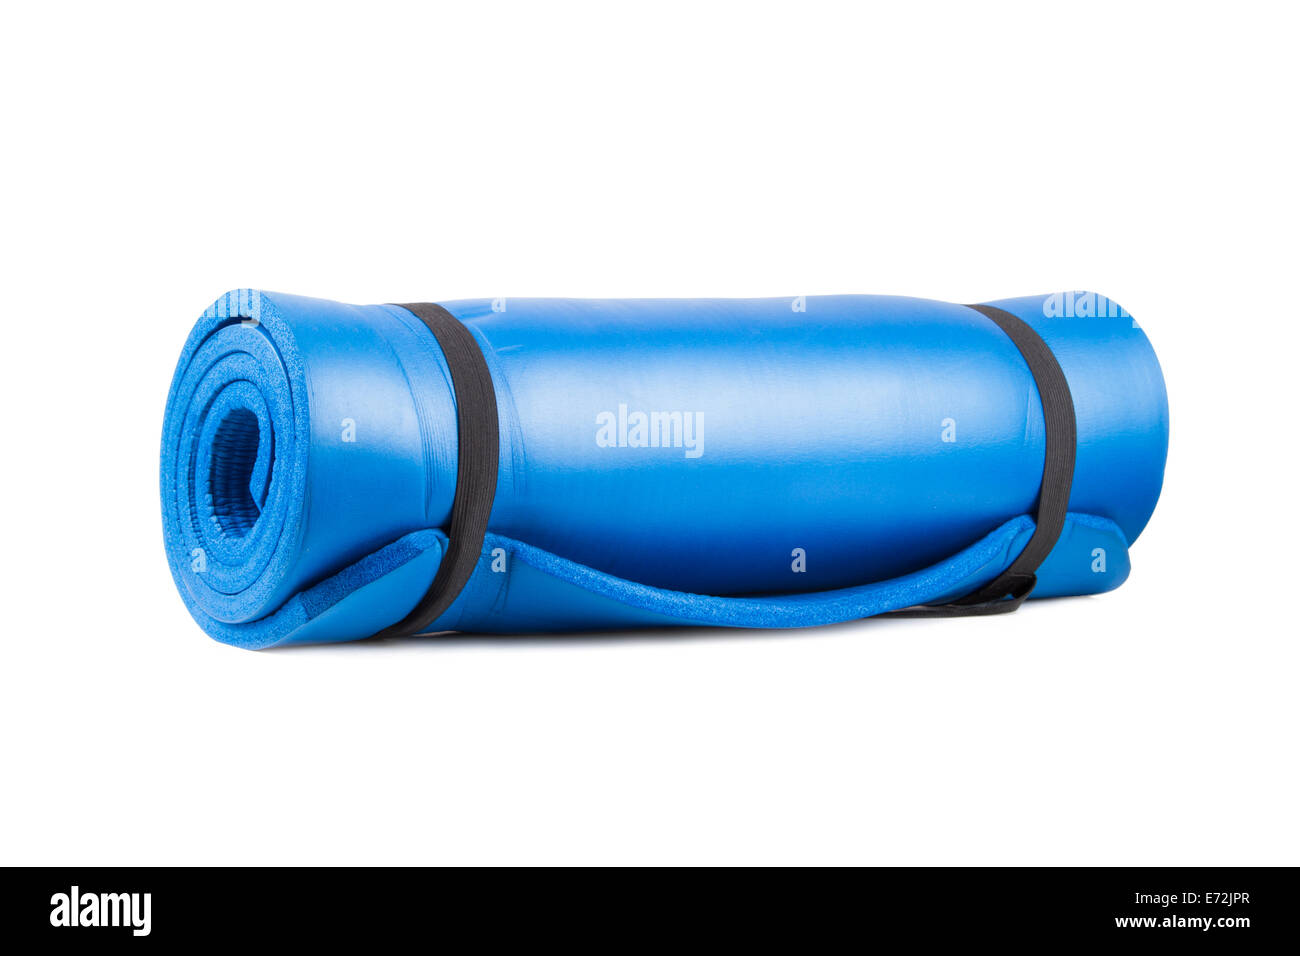 Blue rolled yoga mat for exercise, isolated on white background. Stock Photo